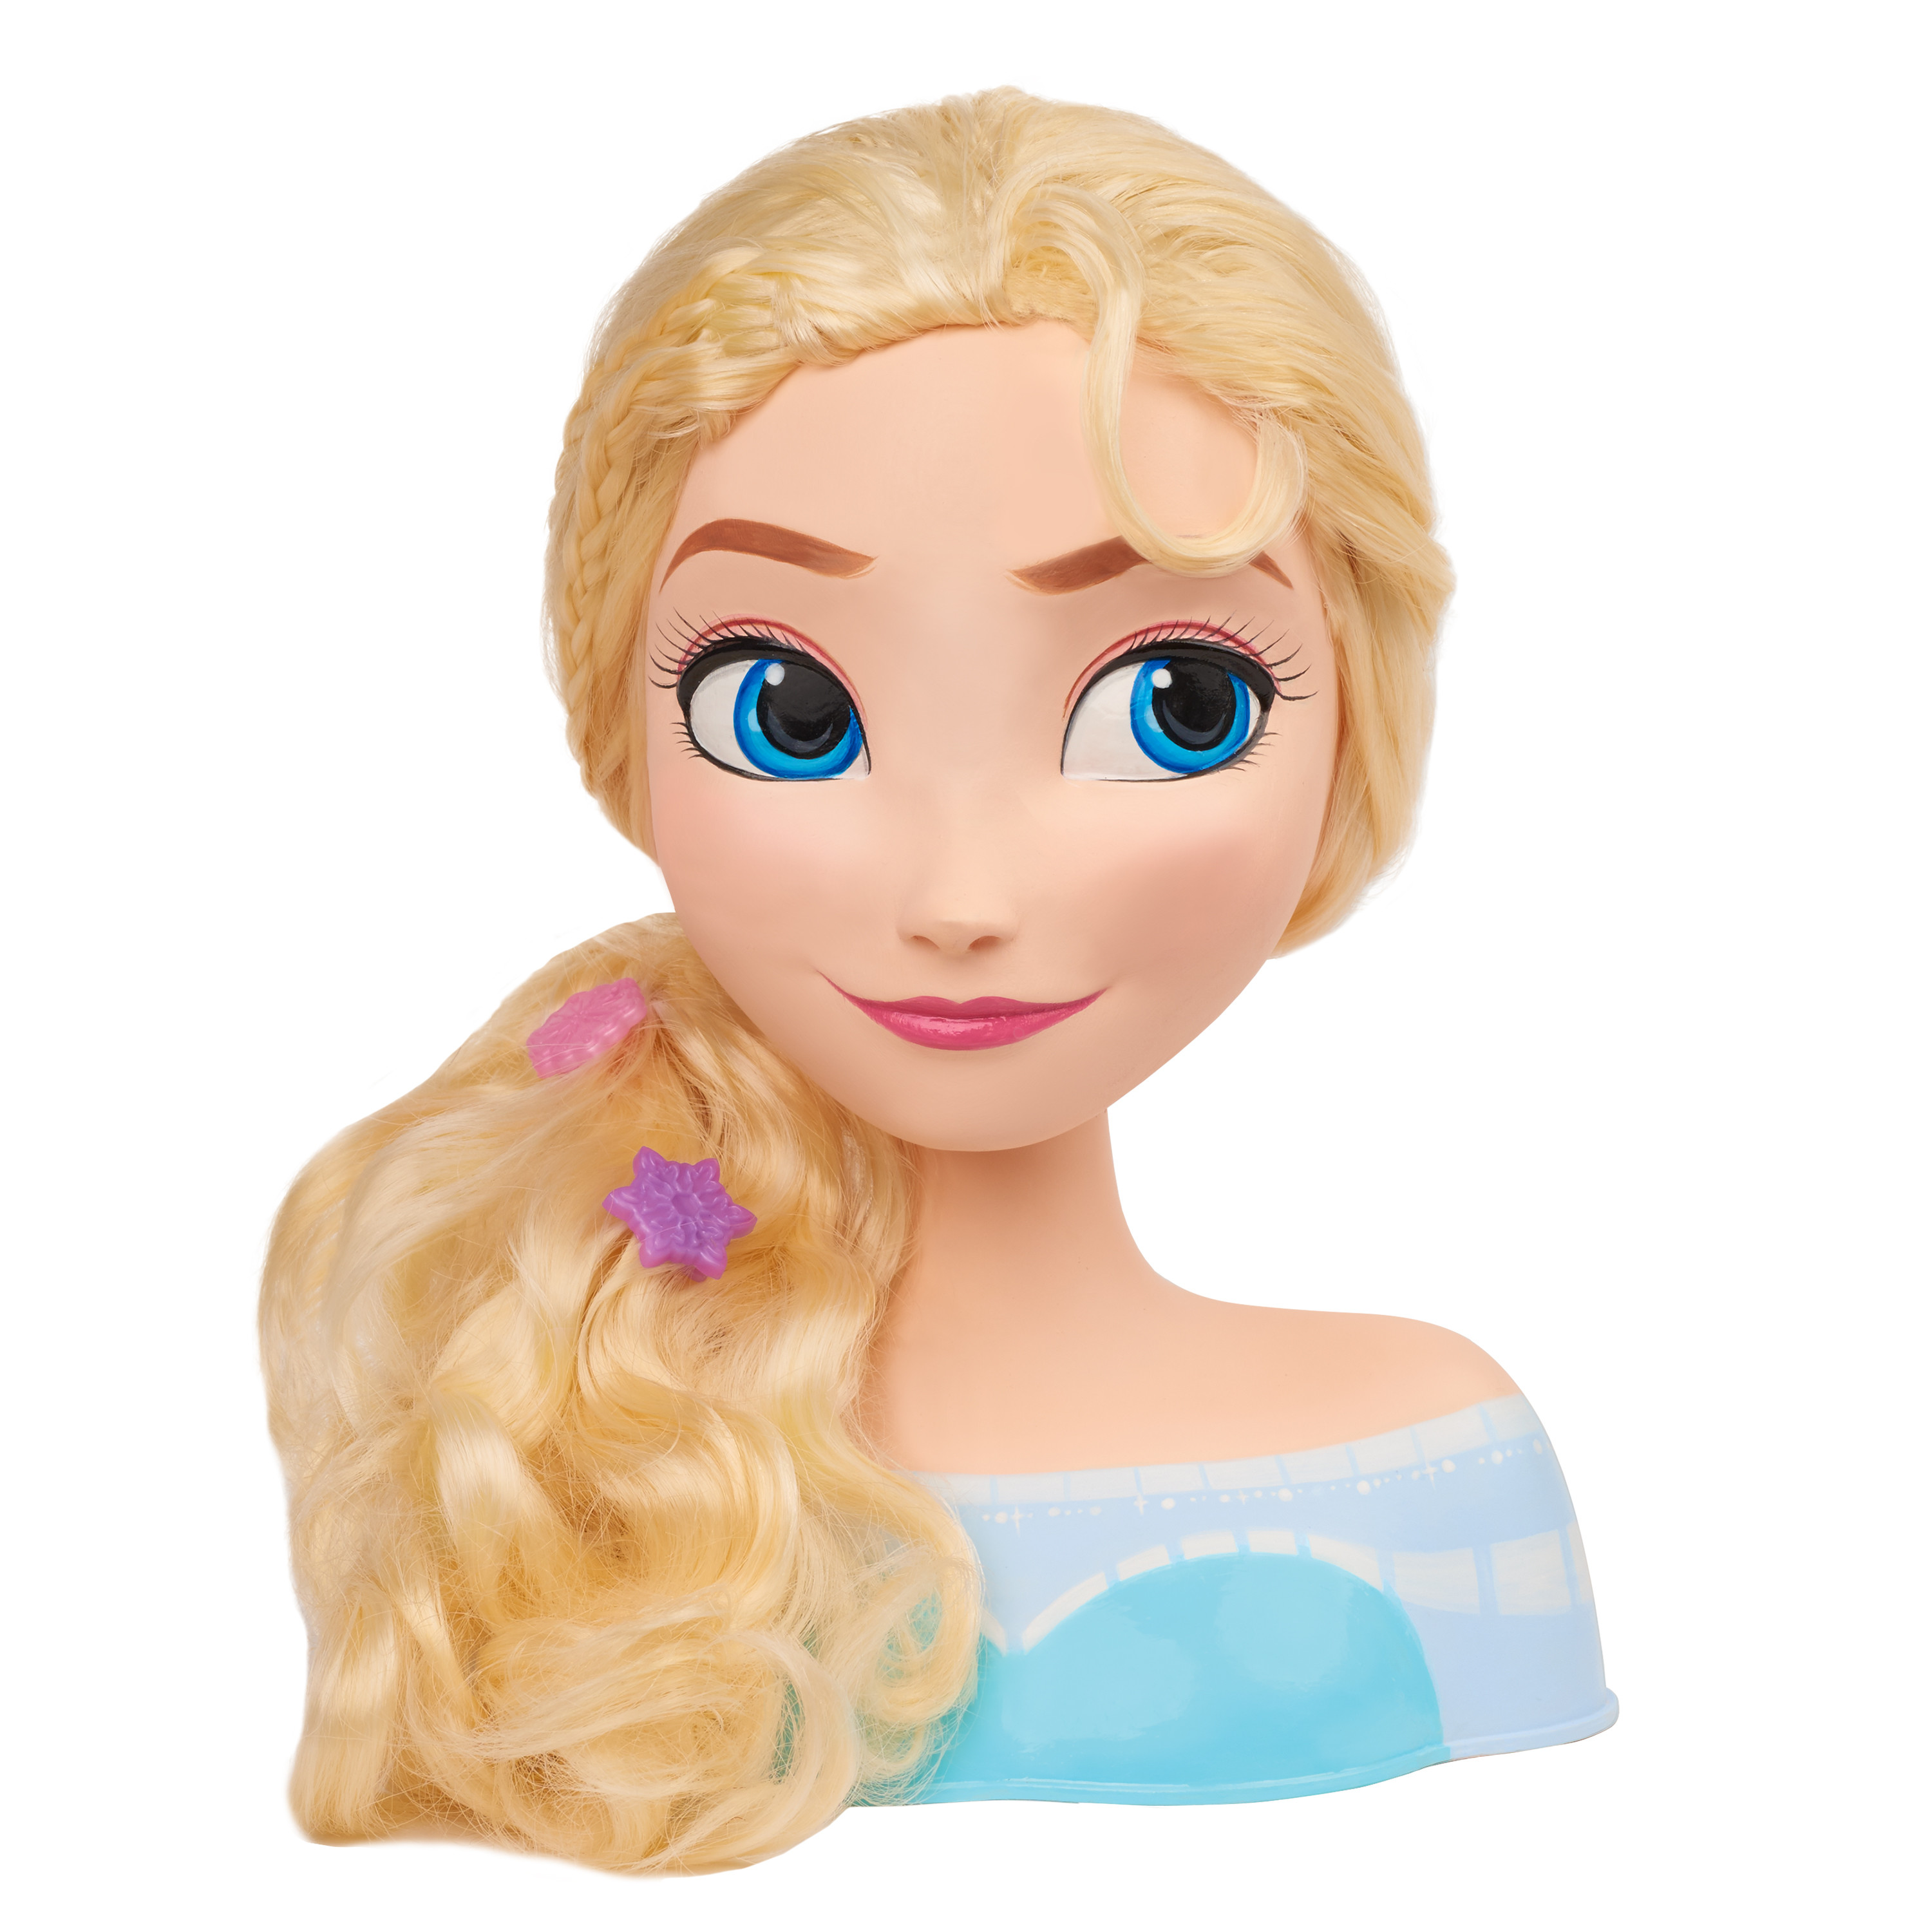 Disney Frozen Elsa Styling Head, Officially Licensed Kids Toys for Ages 3 Up, Gifts and Presents - image 2 of 2